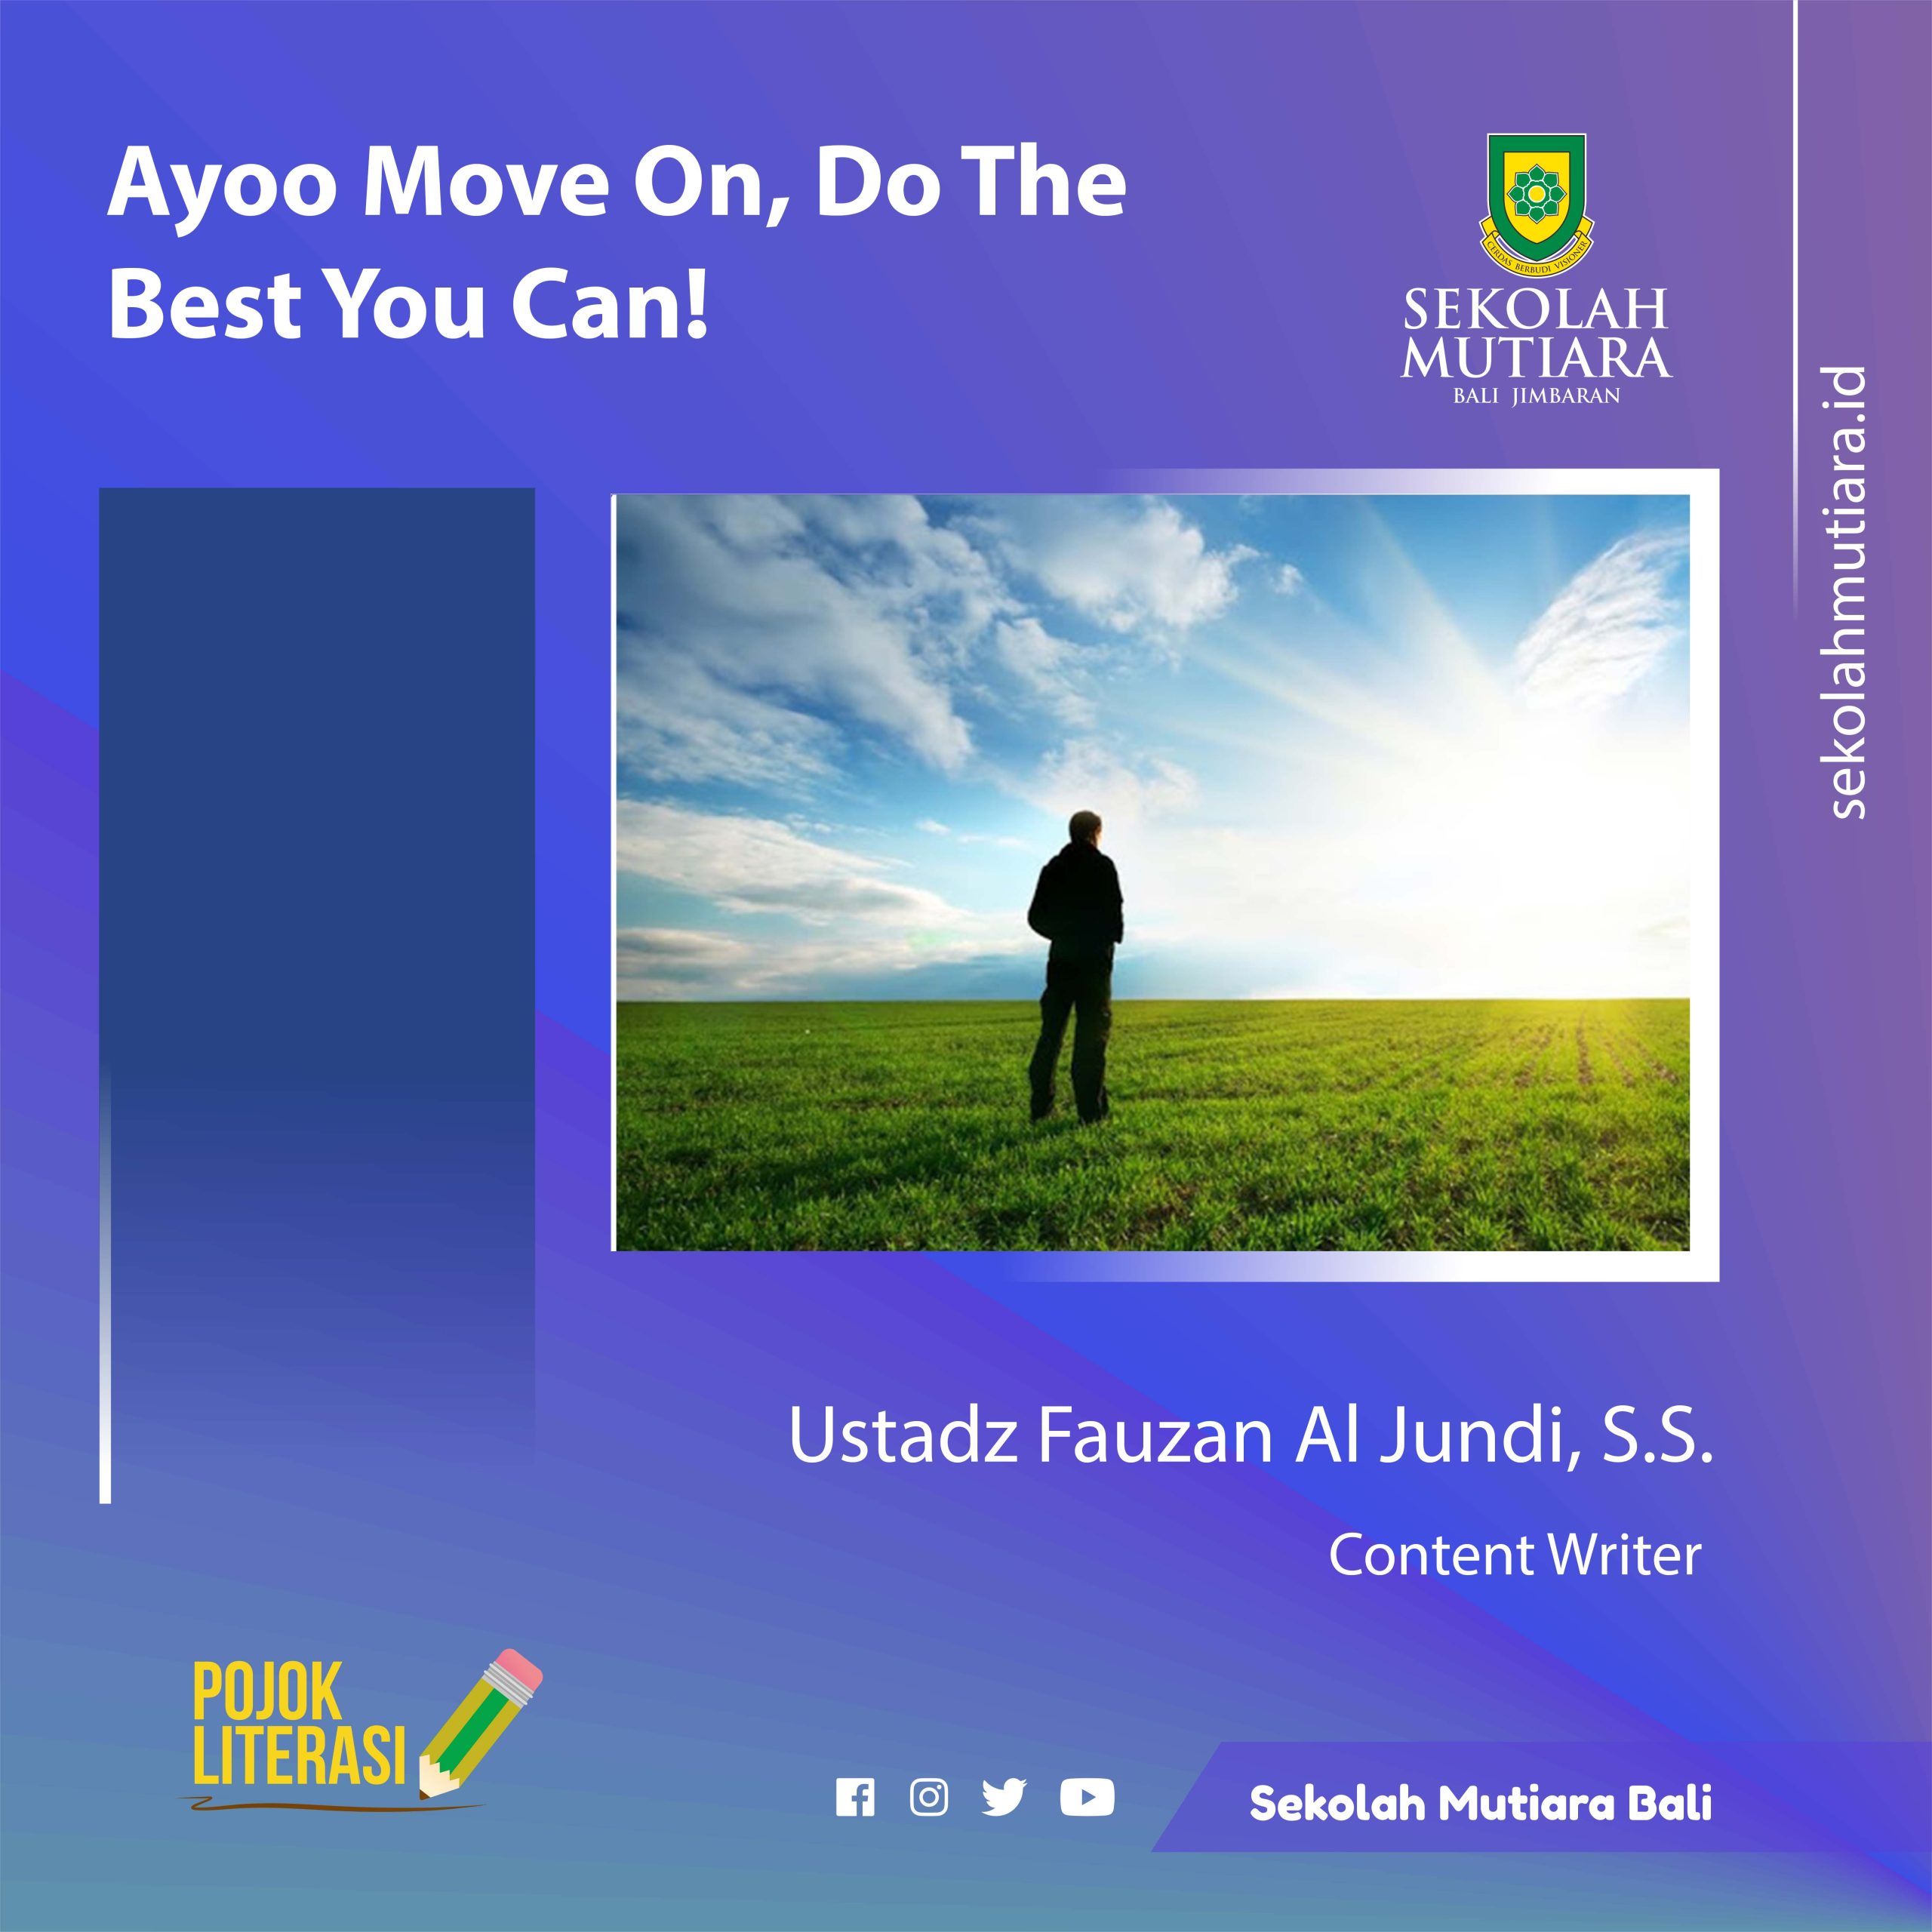 Ayoo Move On, Do The Best You Can!